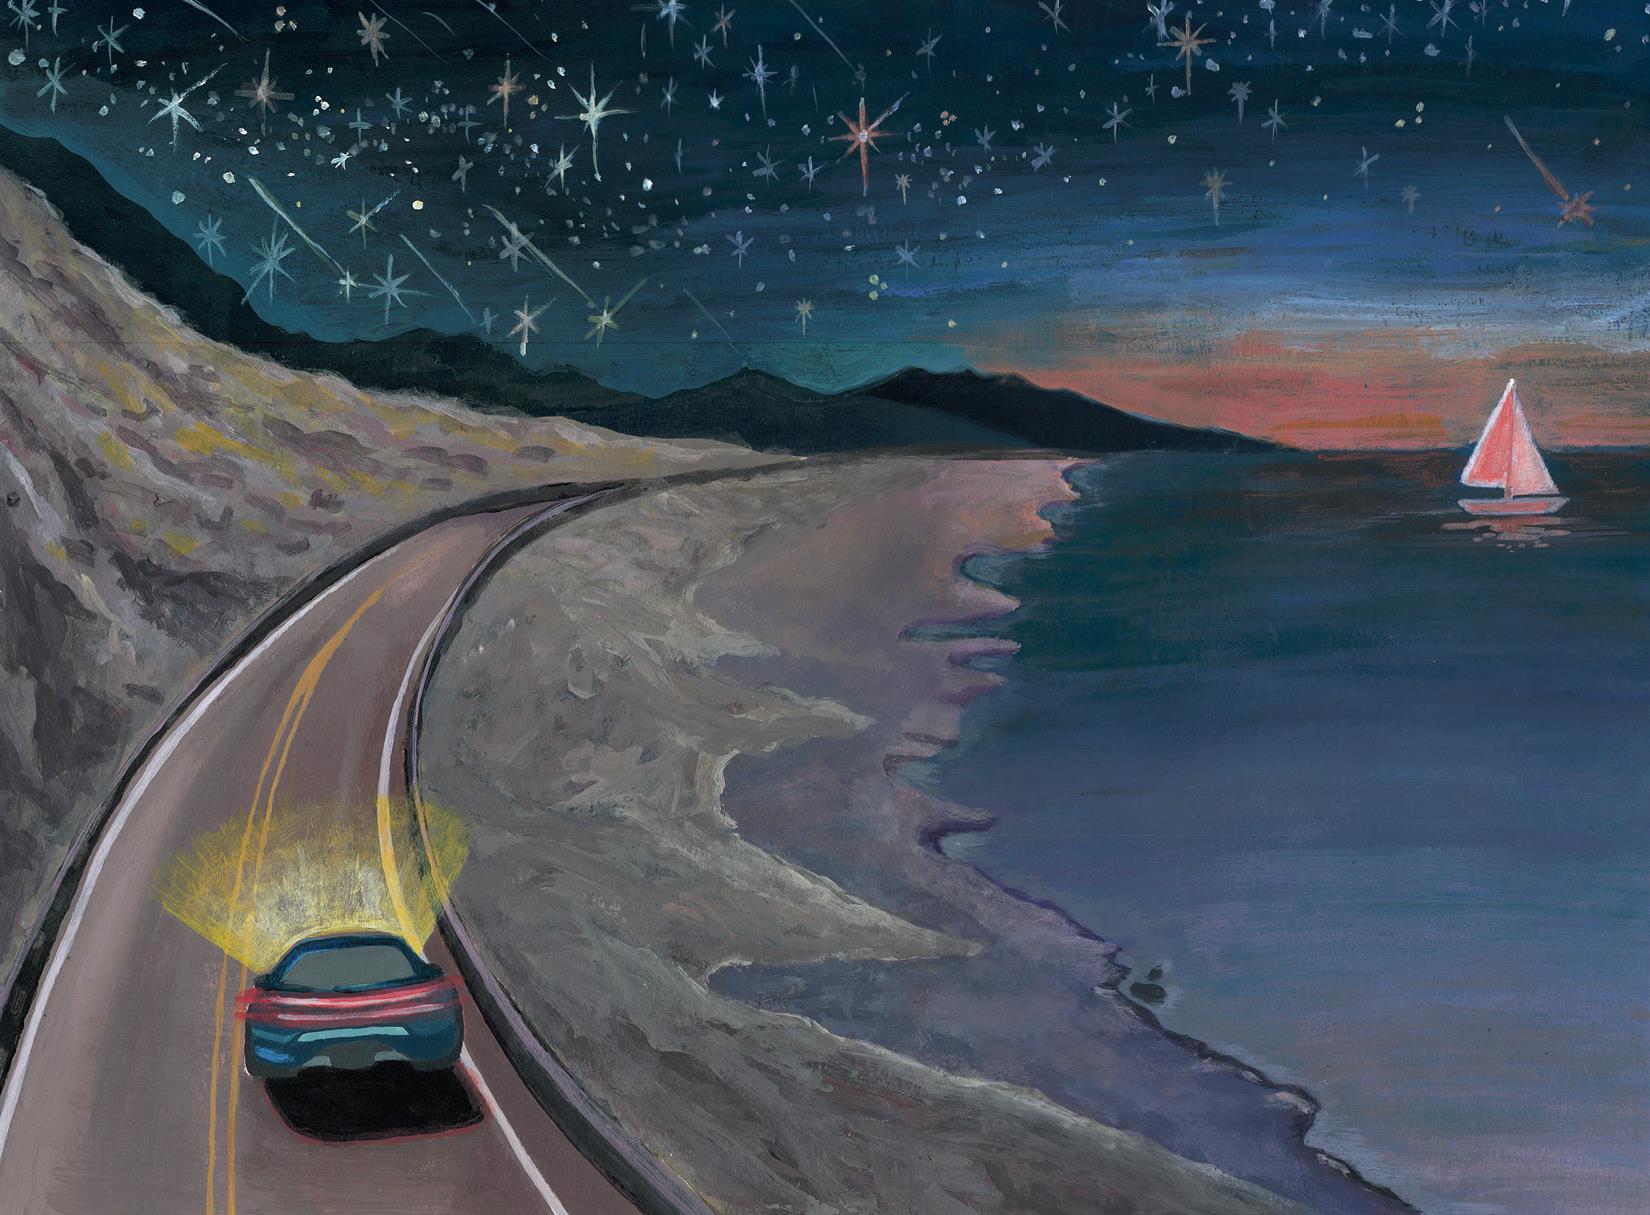 a starry night sky above a coastal highway with a lone car driving along, its headlights shining. One sail boat shown in the water.